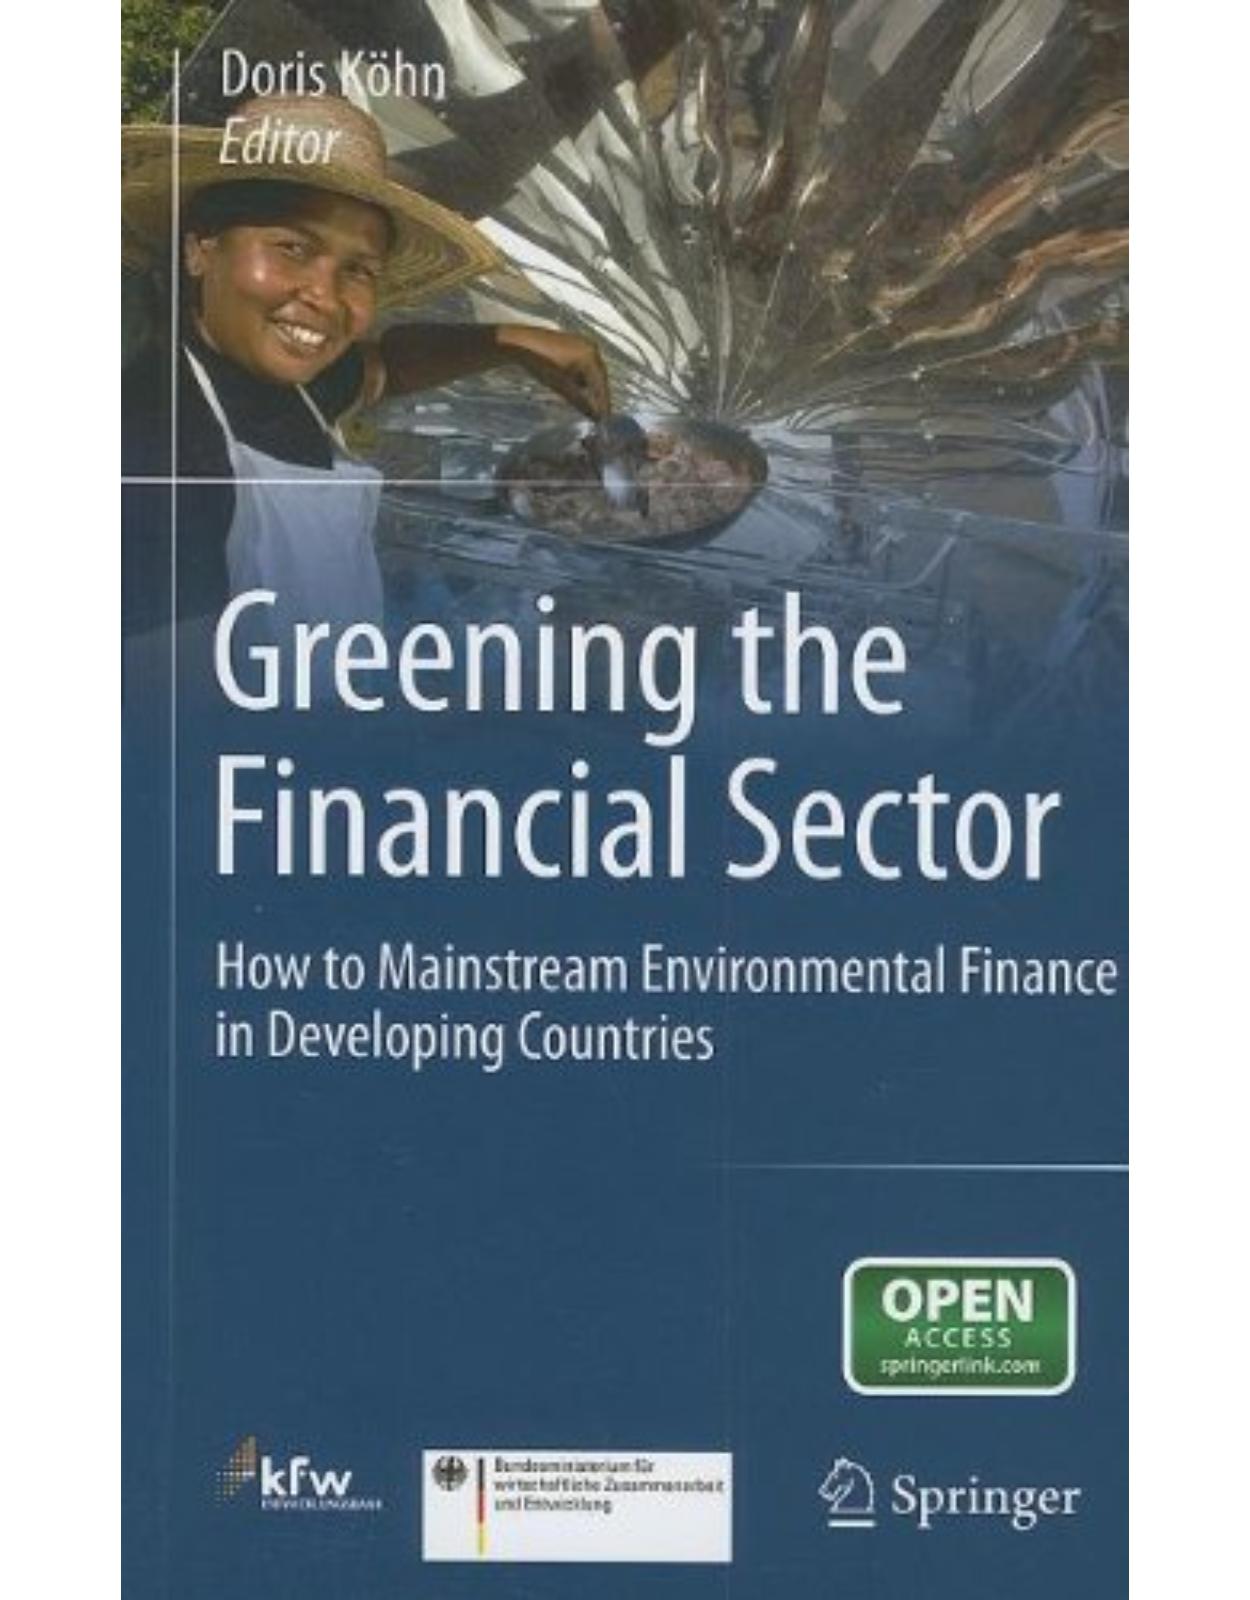 Greening the Financial Sector: How to Mainstream Environmental Finance in Developing Countries